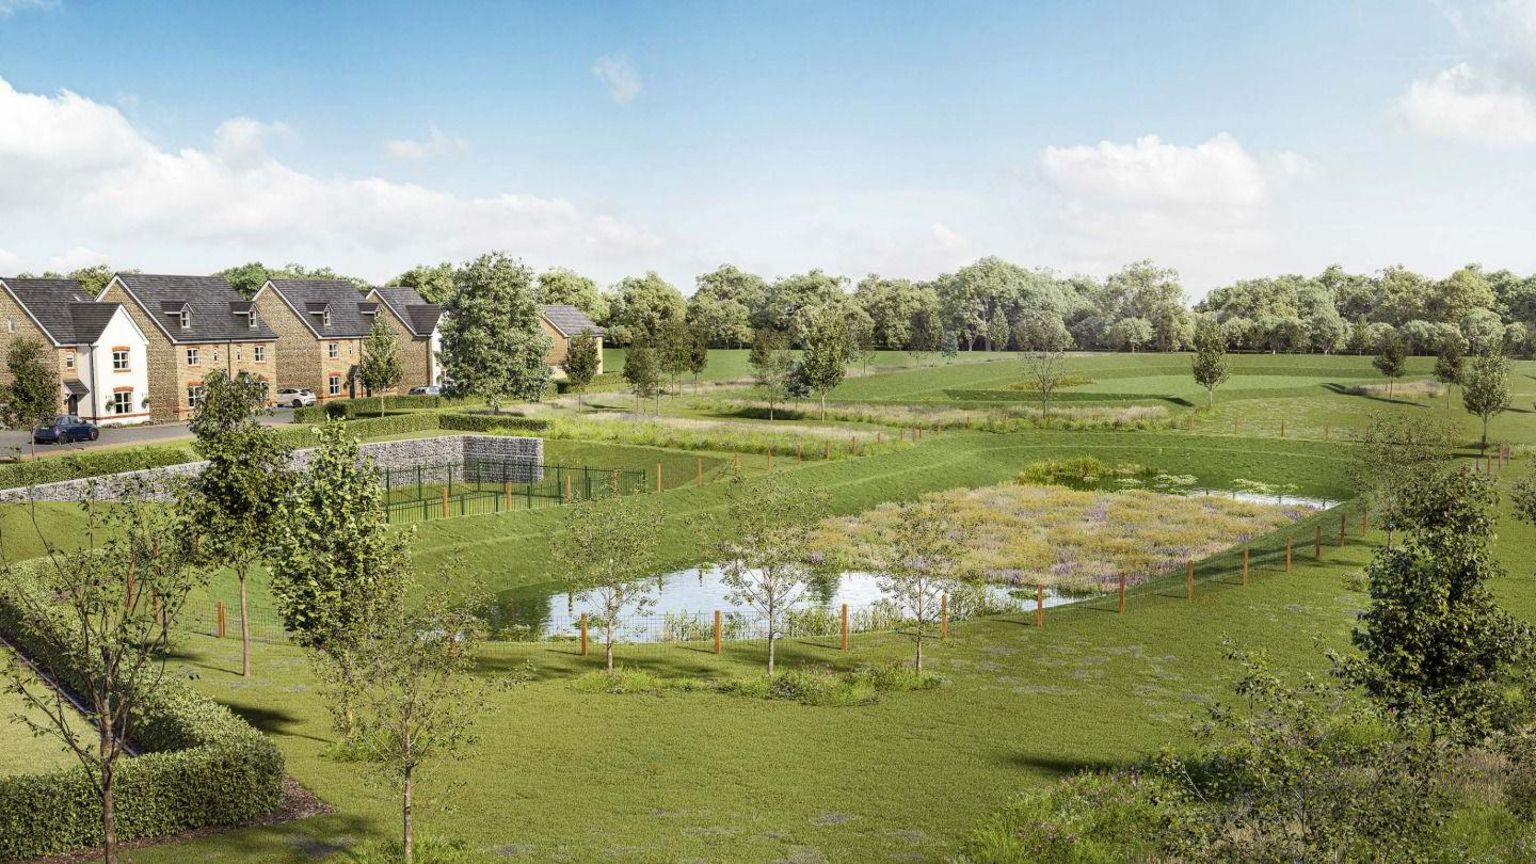 Artist impression of new homes with pond in the middle